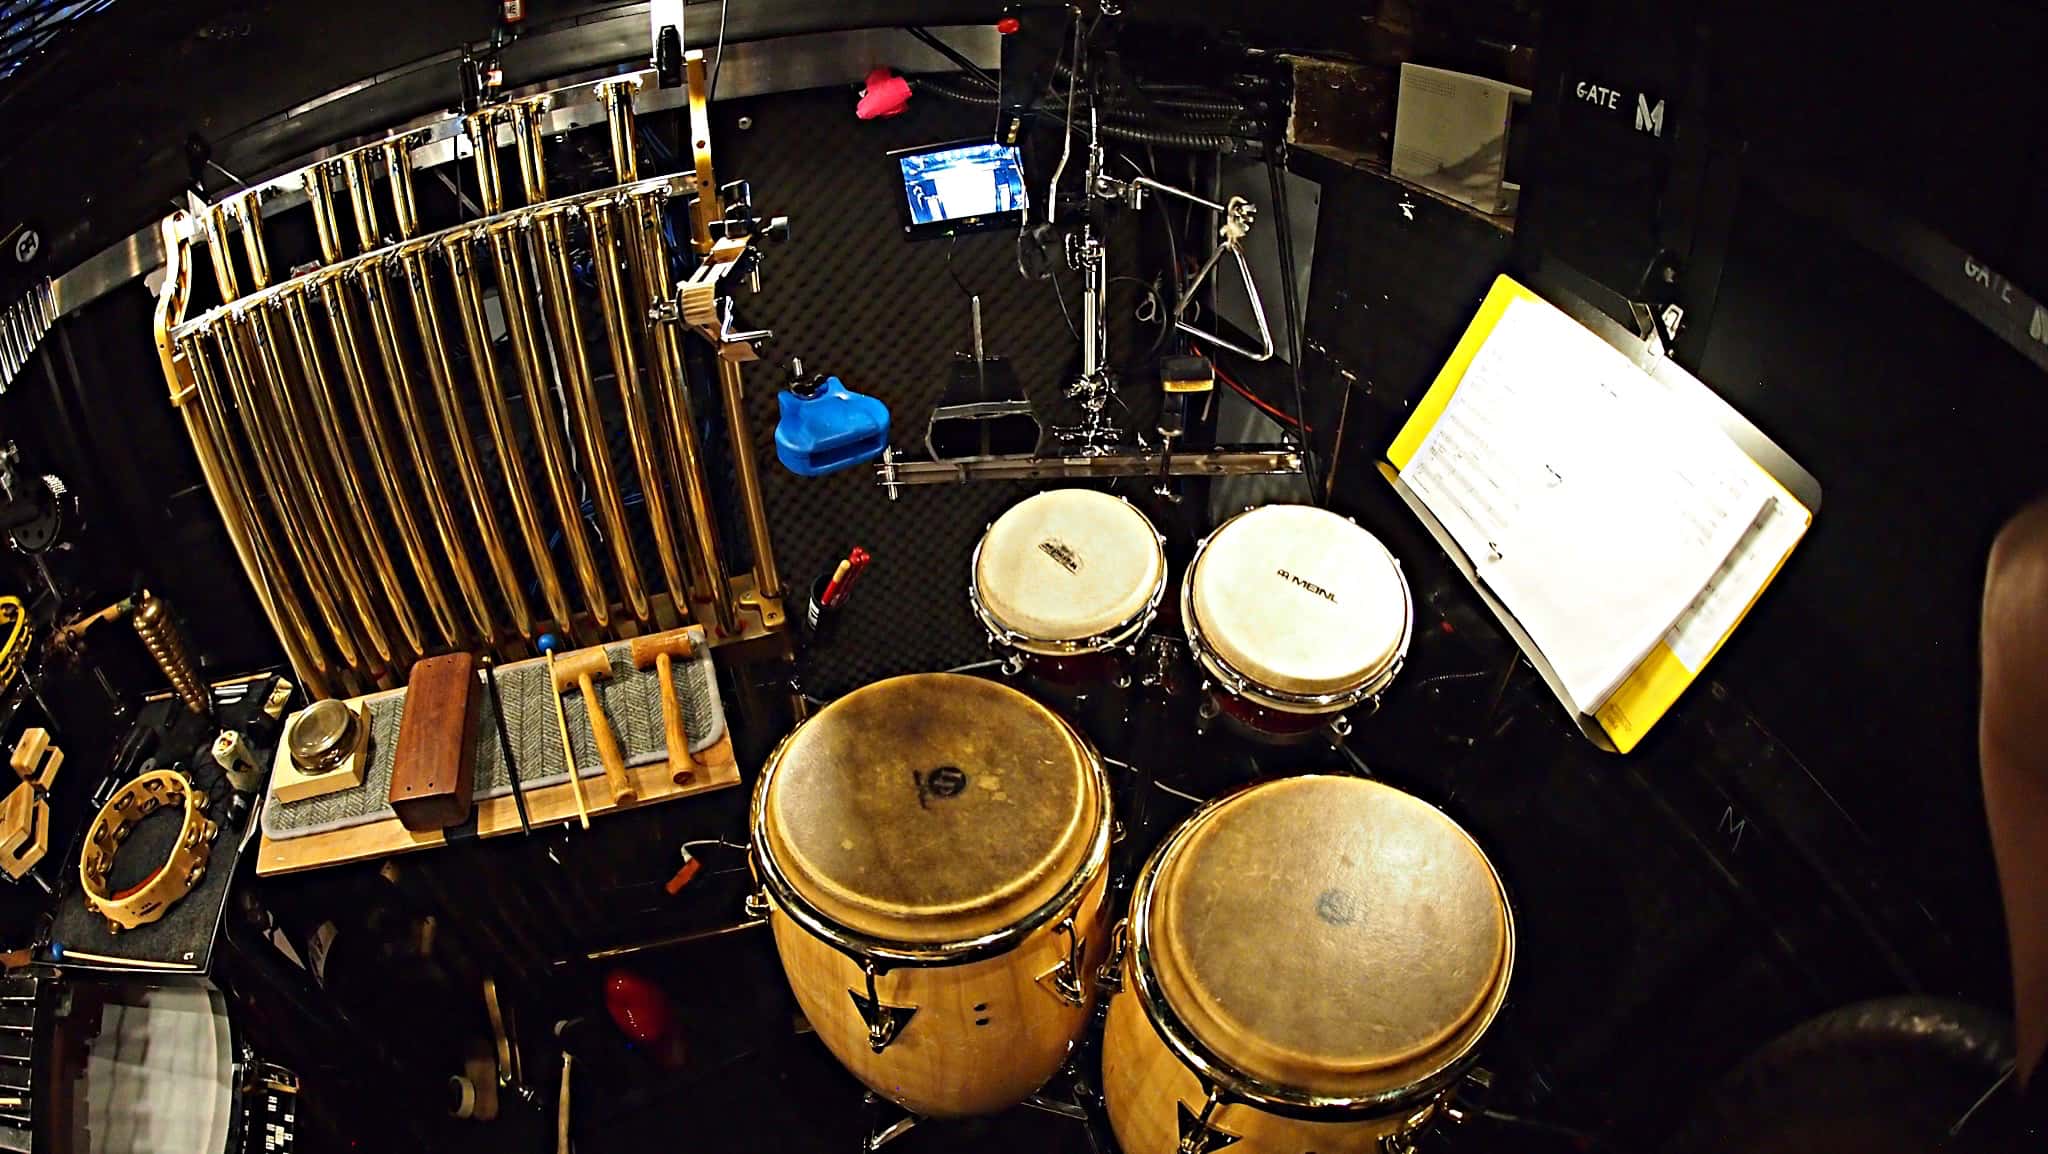 Brian Kirk's percussion setup for The Little Mermaid at the 5th Avenue Theatre in Seattle, Washington.